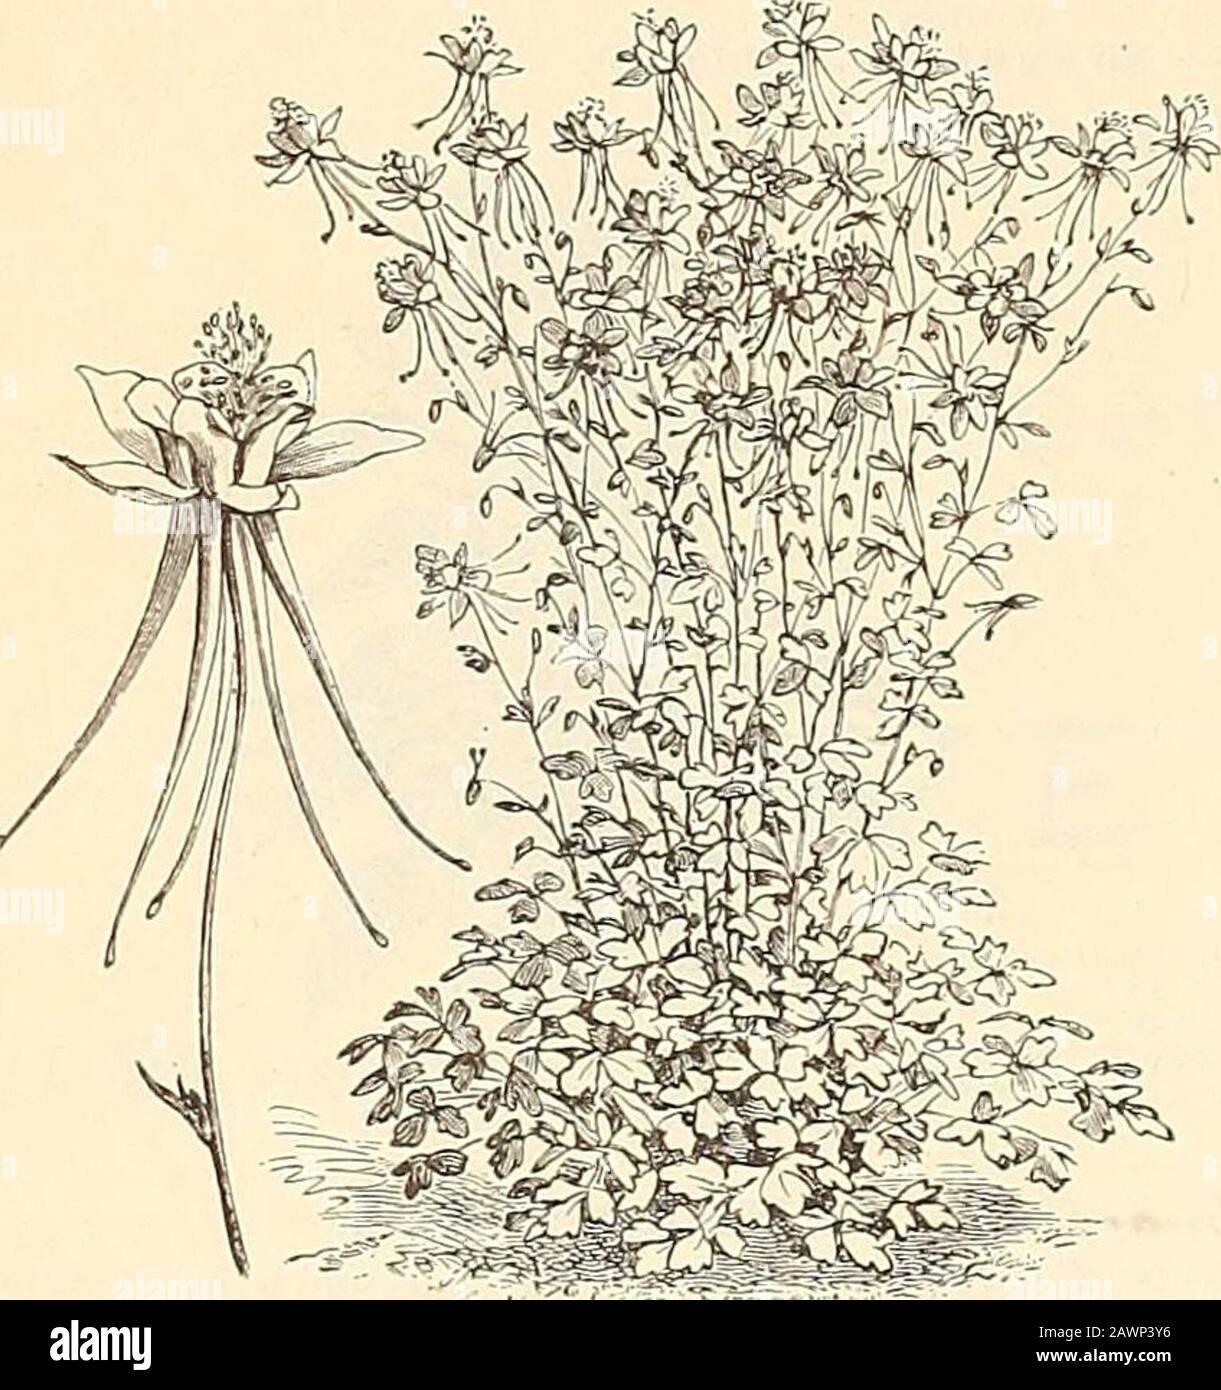 Peter Henderson & Co.'s catalogue of everything for the garden : 1880 . Anemone Corouaria (Poppy Anemone). Mixed colors, as above, lft 1° ANGELONIA. Equally desirable as a pot-plant for the parlor or greenhousein winter or for outside planting in spring. It forms a plant18 inches high, terminated by long spikes of cup-shapedfragrant flowers, in color bright scarlet spotted with white.Although a perennial, it flowers the first season sown. Angelonia Grandinora. Described above 25 Atropurpurea. (See Novelties) 50 **ANTrRJRHINTJM MAJTJS (Snap Dragon One of our favorite plants, of the easiest cul Stock Photo